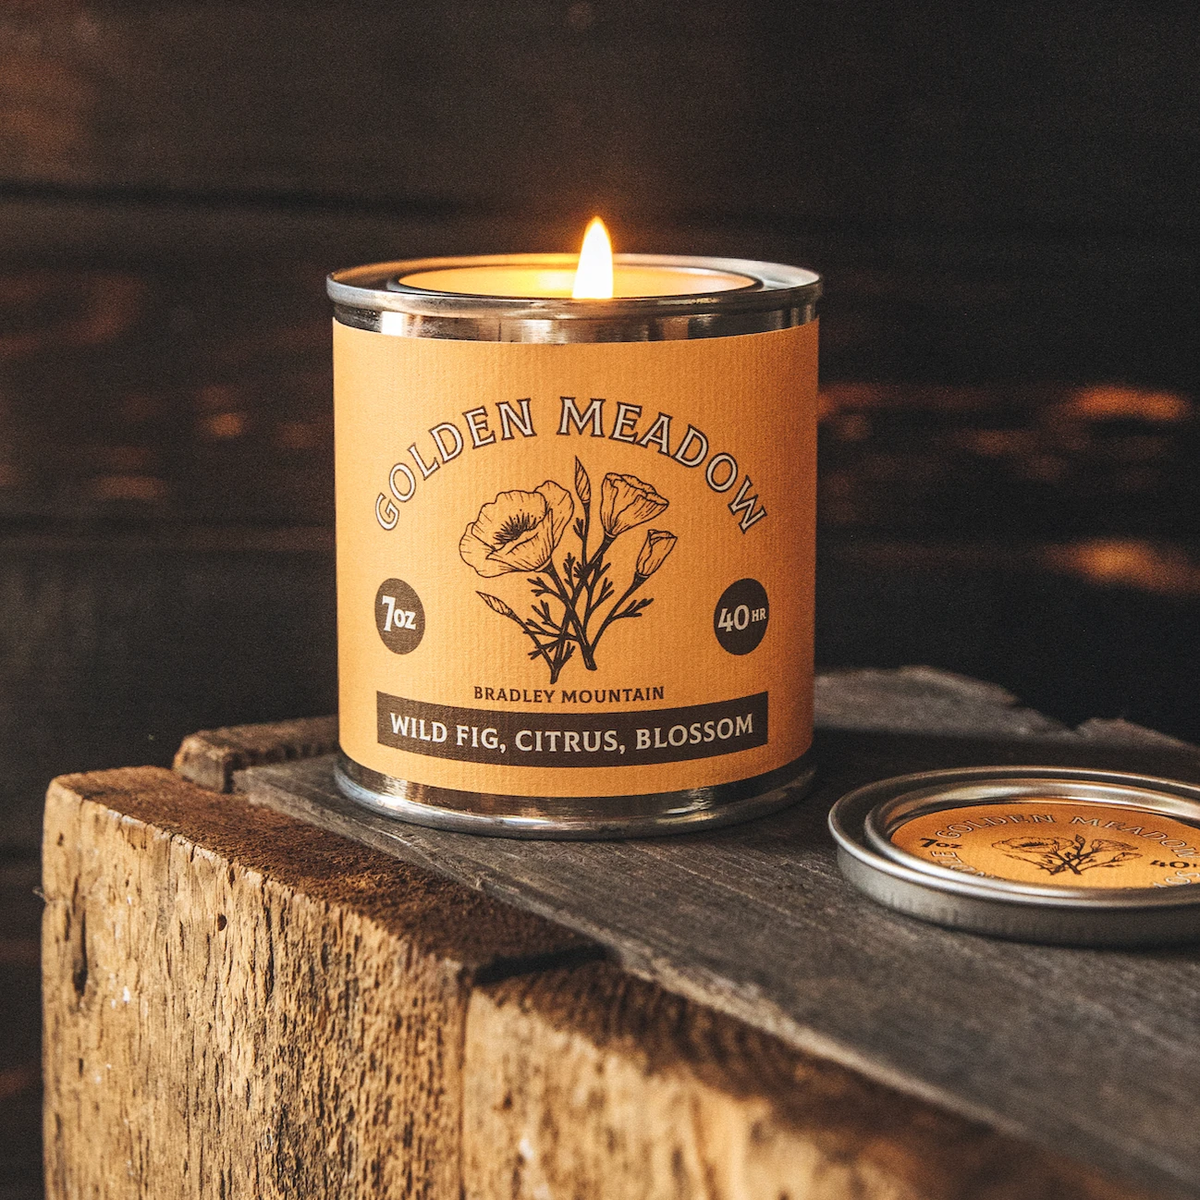 Golden Meadow Travel Candle